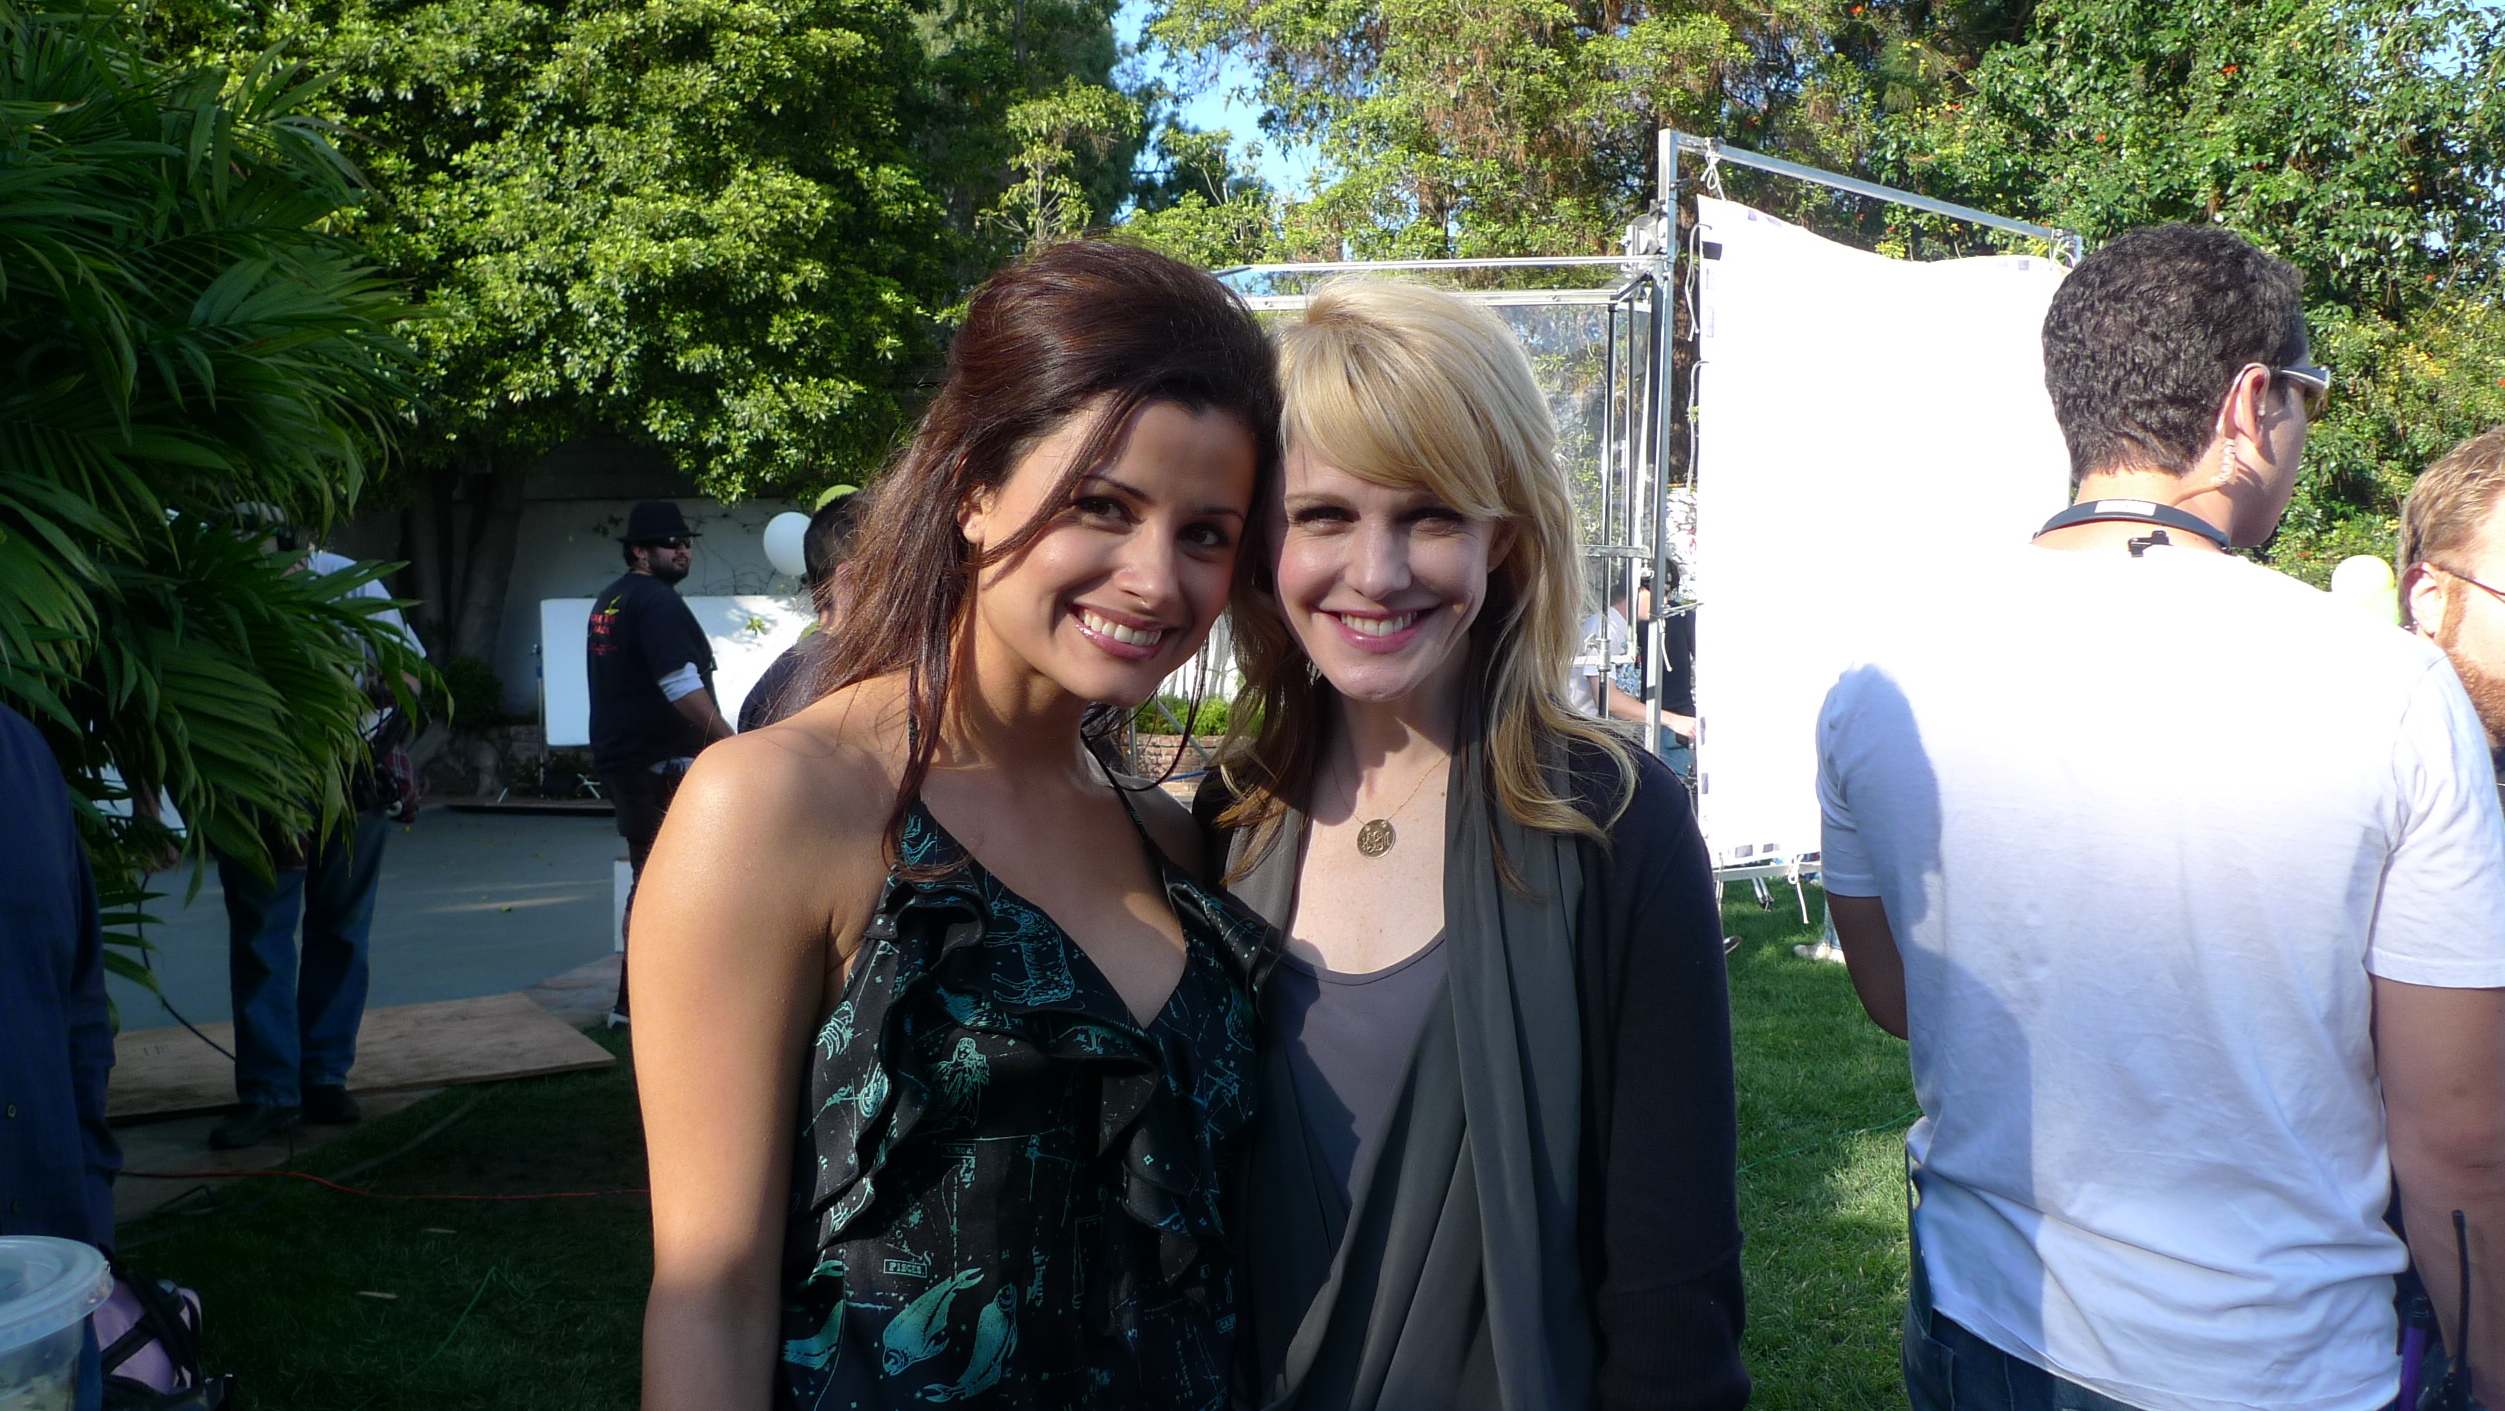 On set of Film Mother's Little Helpers, Kathryn Morris & Catalina Rodriguez